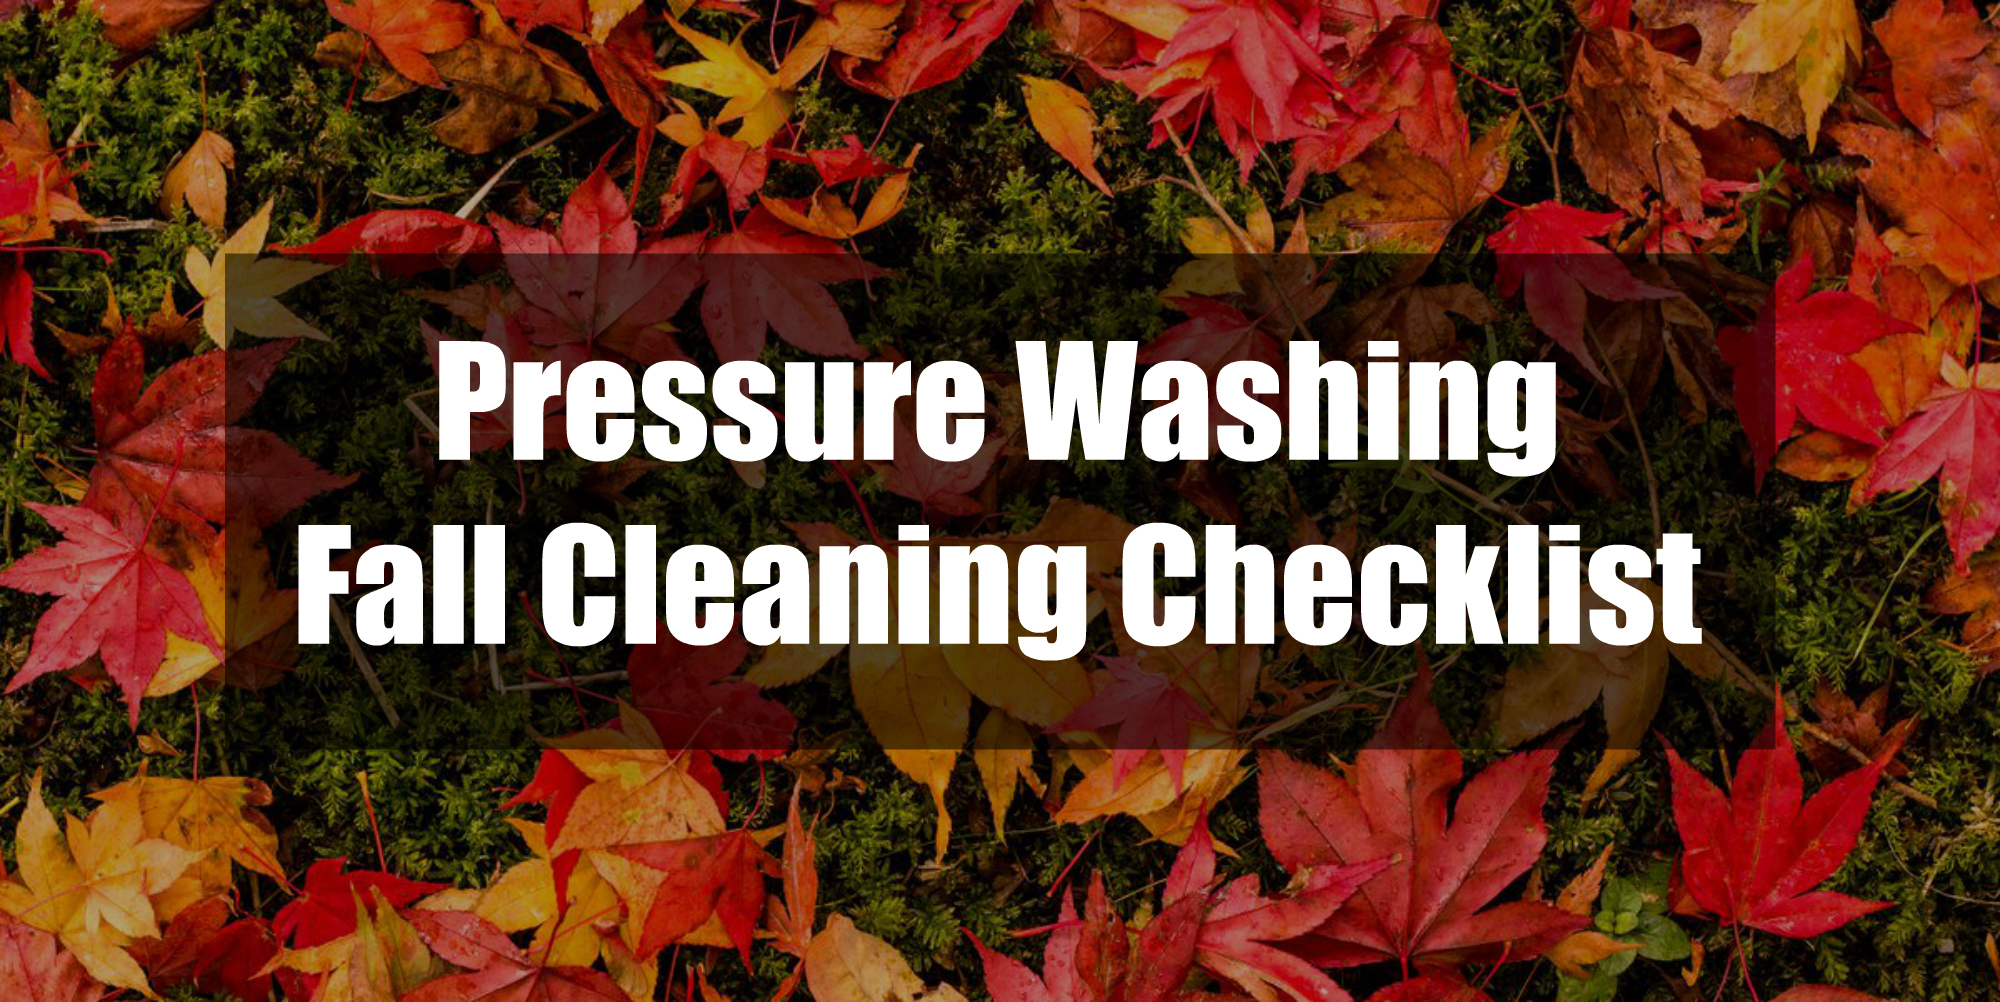 Pressure Washing Fall Cleaning Checklist